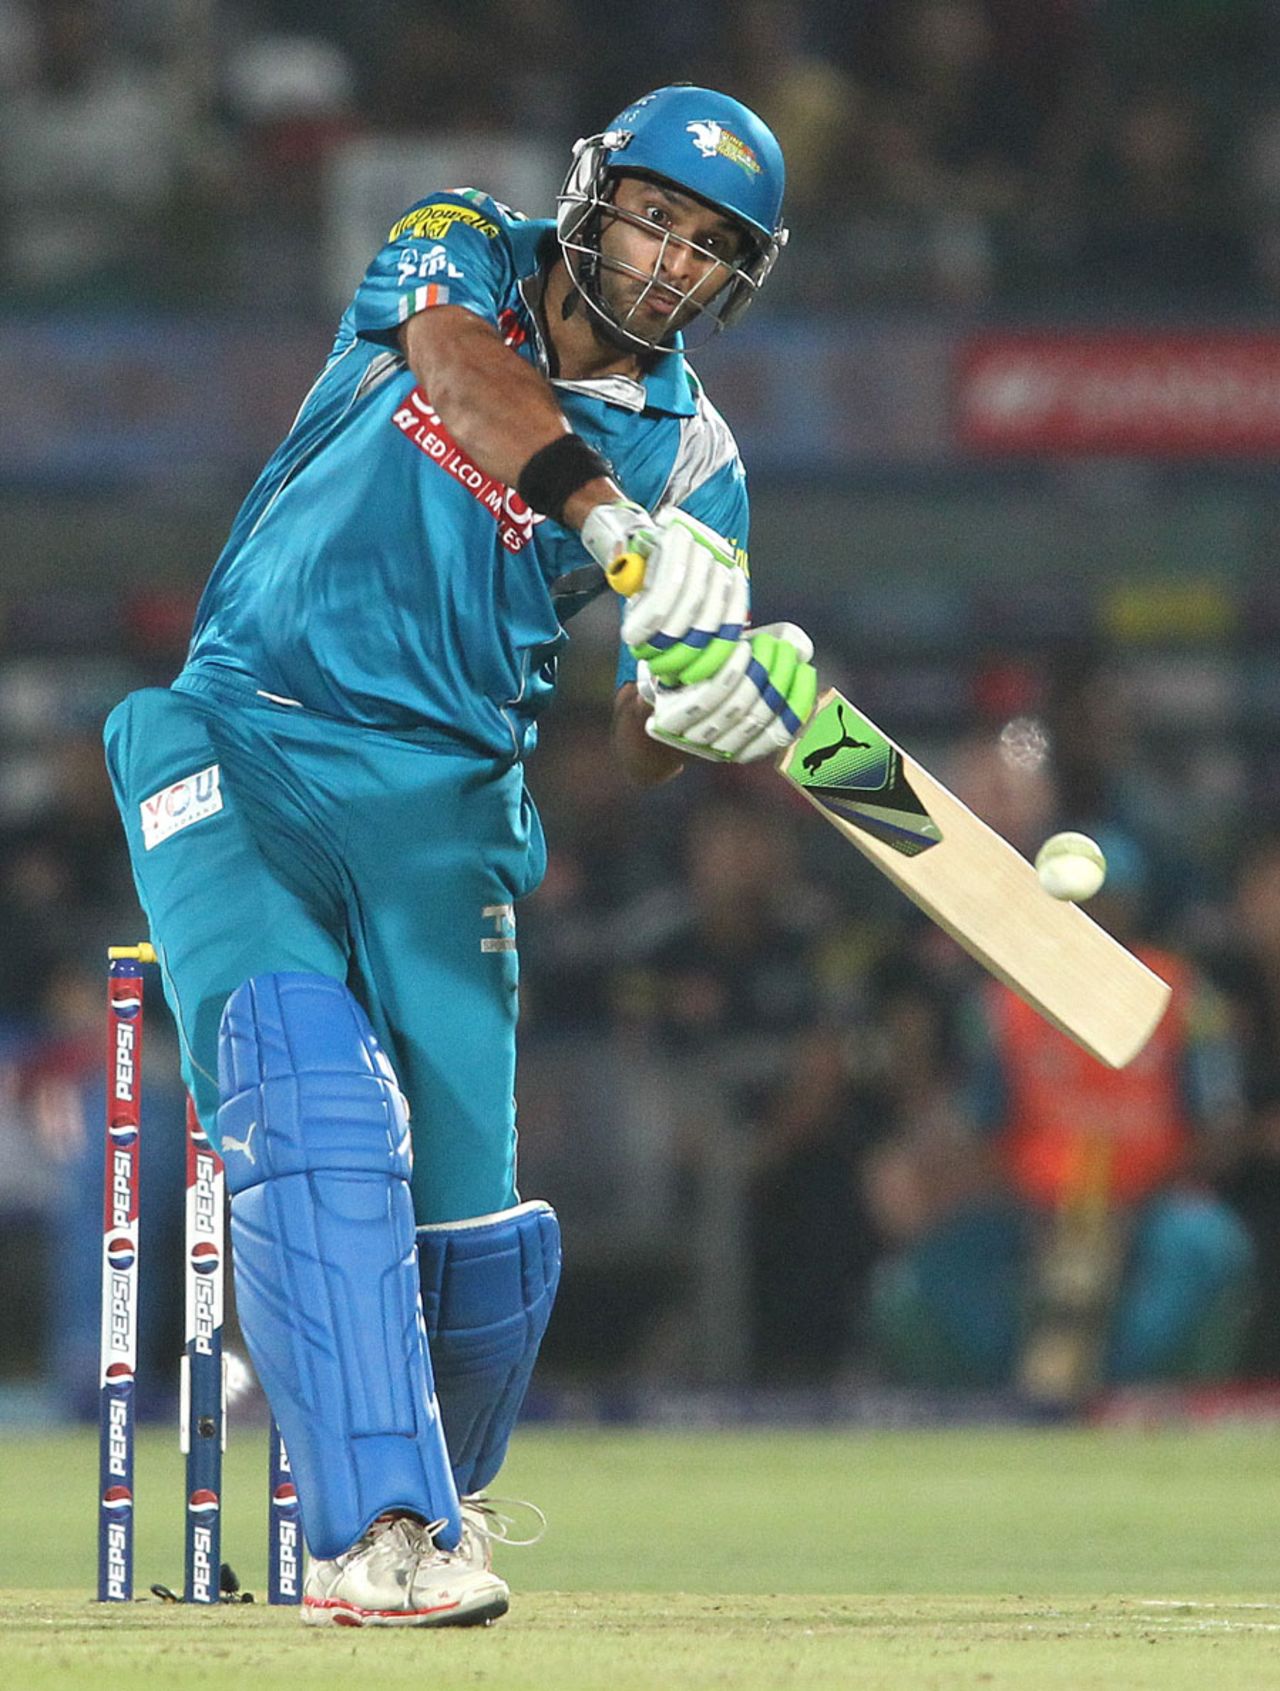 Yuvraj Singh launches into a six during his innings of 15, Rajasthan Royals v Pune Warriors, IPL 2013, Jaipur, May 5, 2013